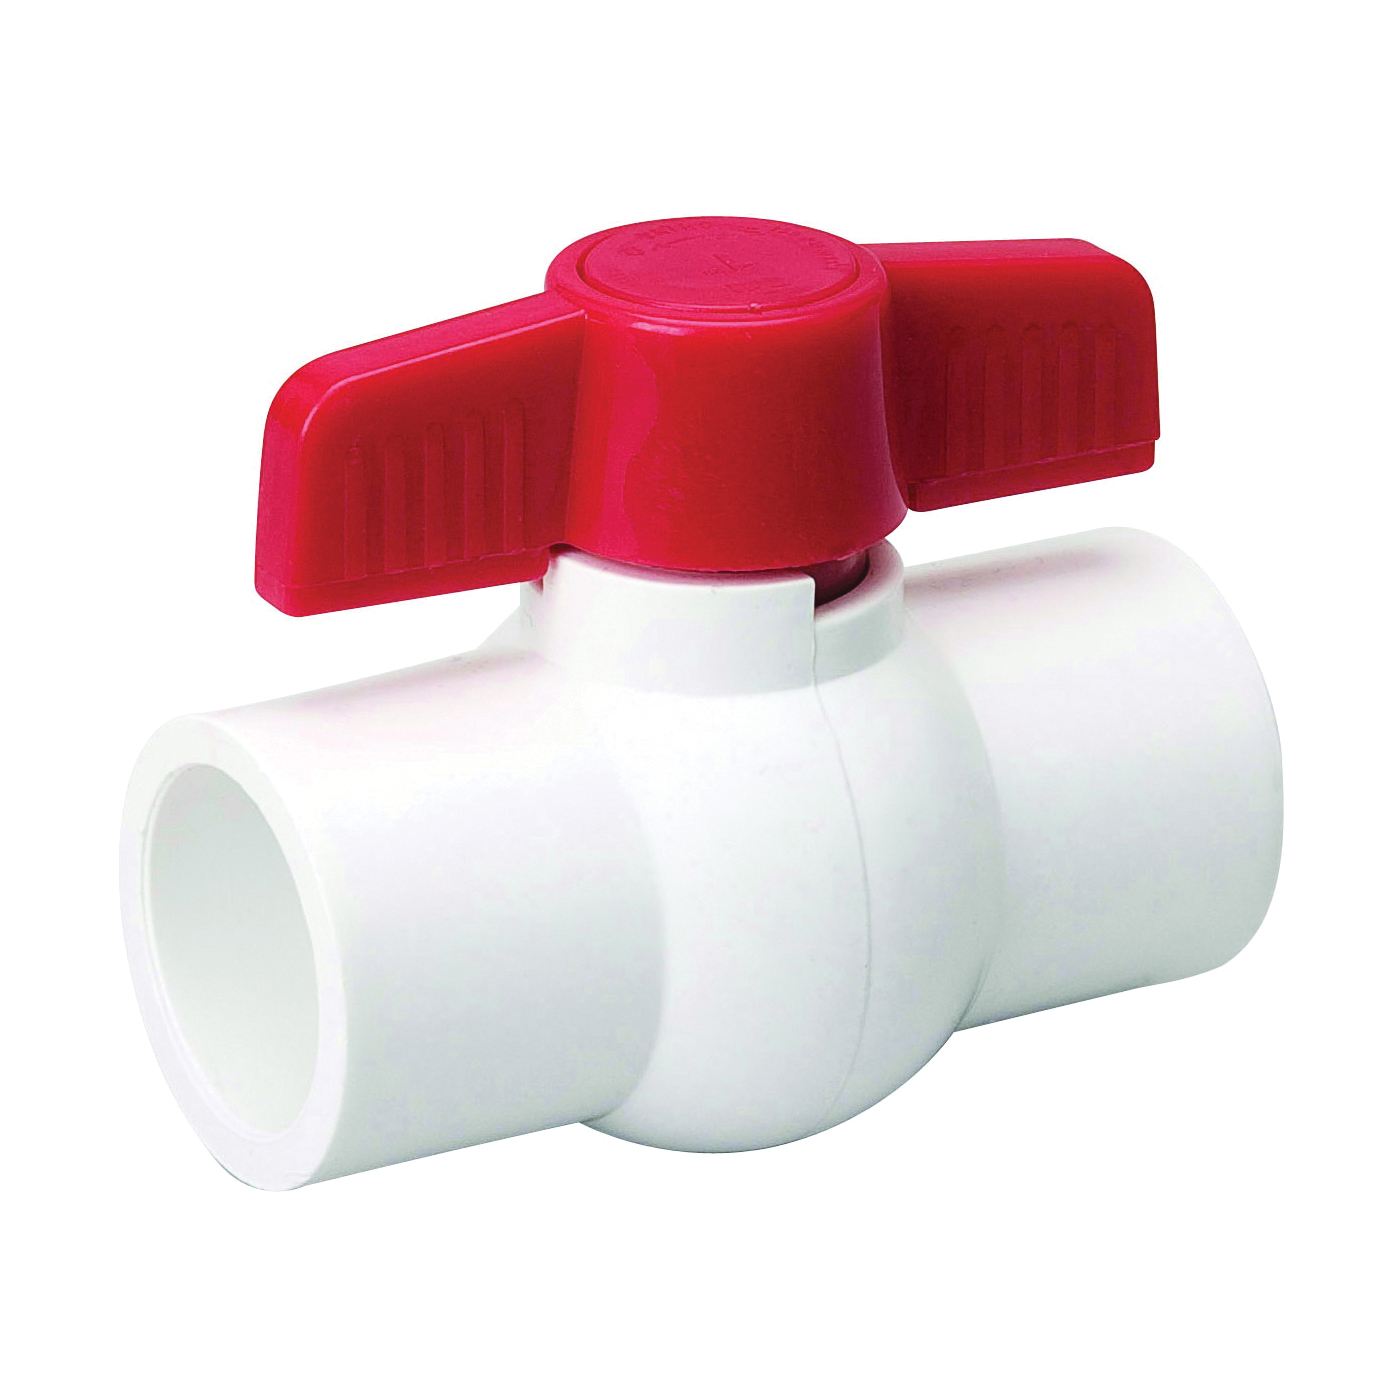 107-639 Ball Valve, 2-1/2 in Connection, Compression, 150 psi Pressure, Manual Actuator, PVC Body